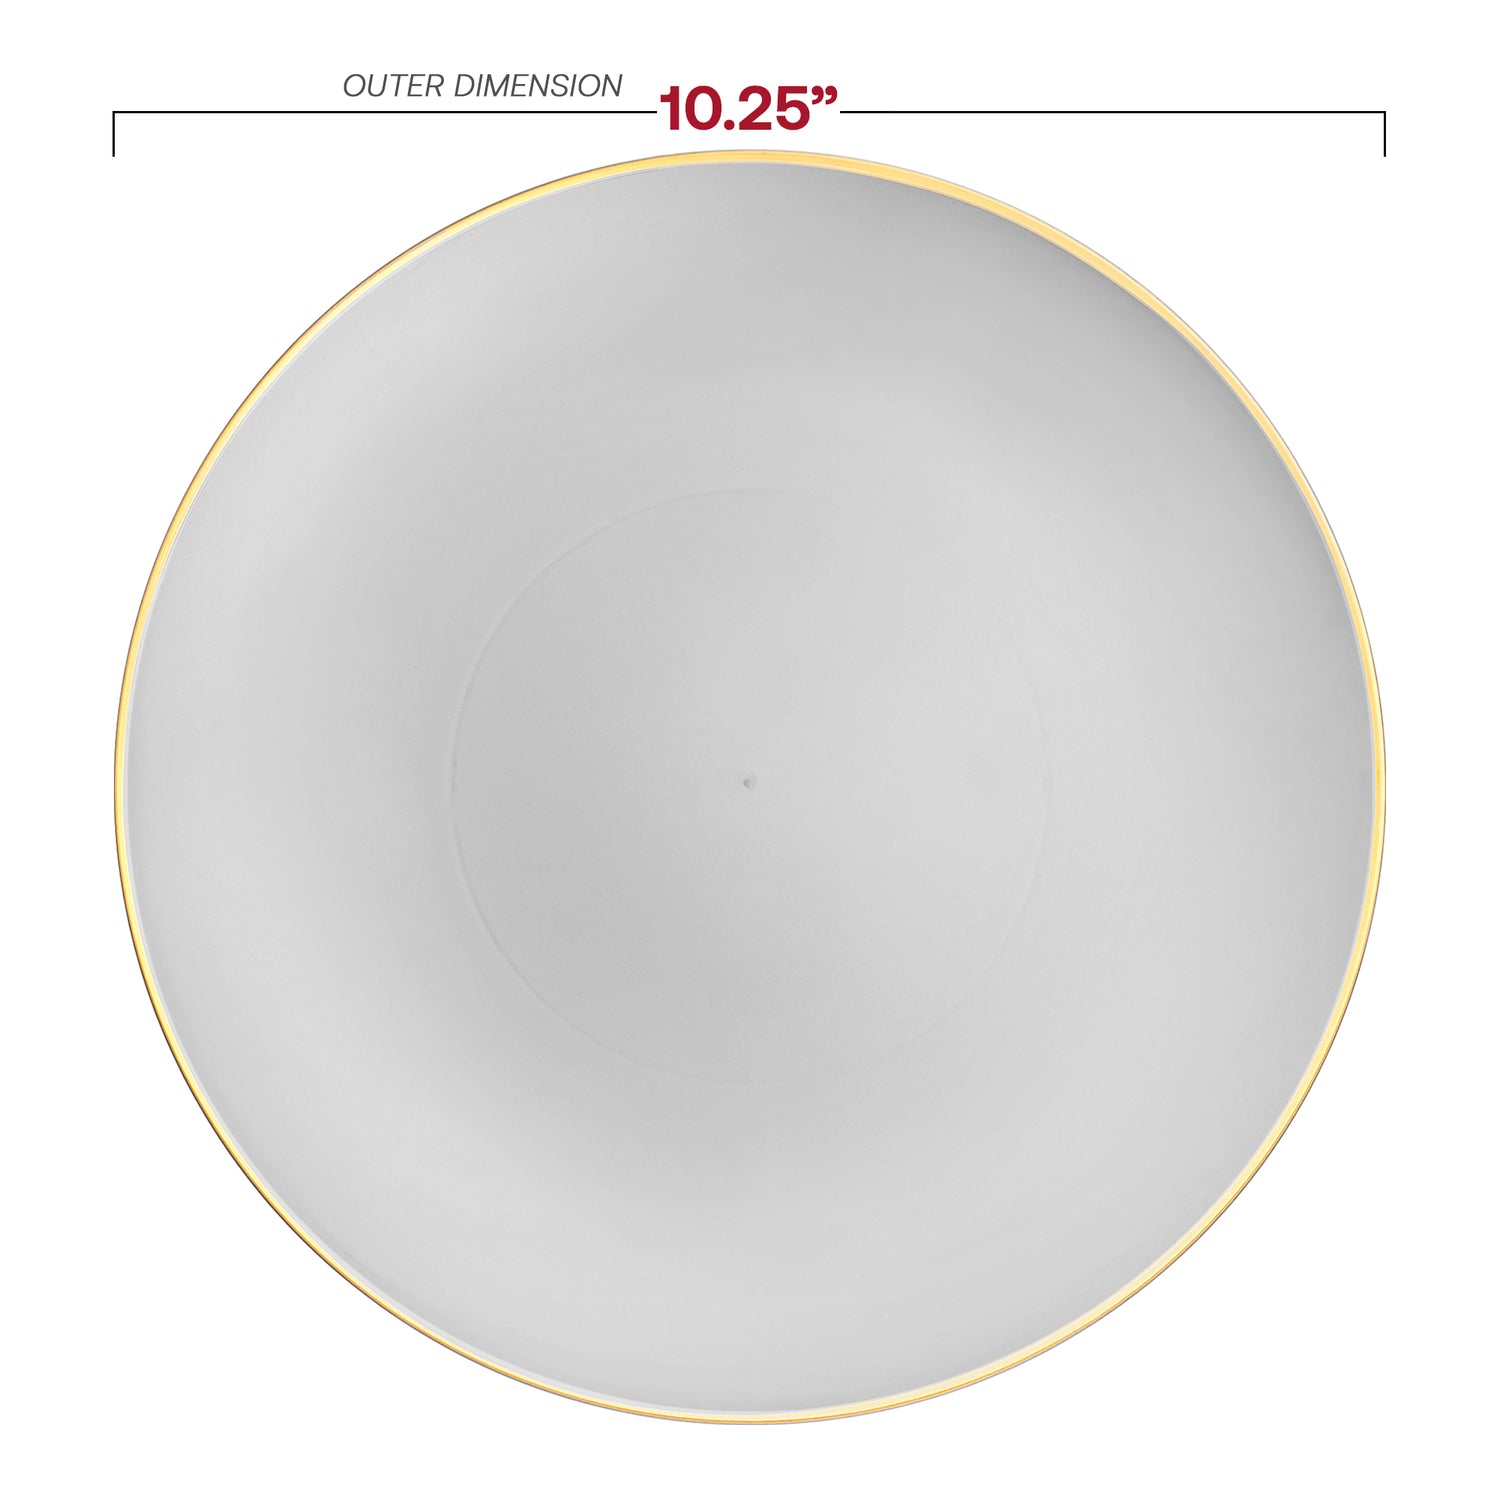 Gray with Gold Organic Round Disposable Plastic Dinner Plates (10.25") Dimension | The Kaya Collection